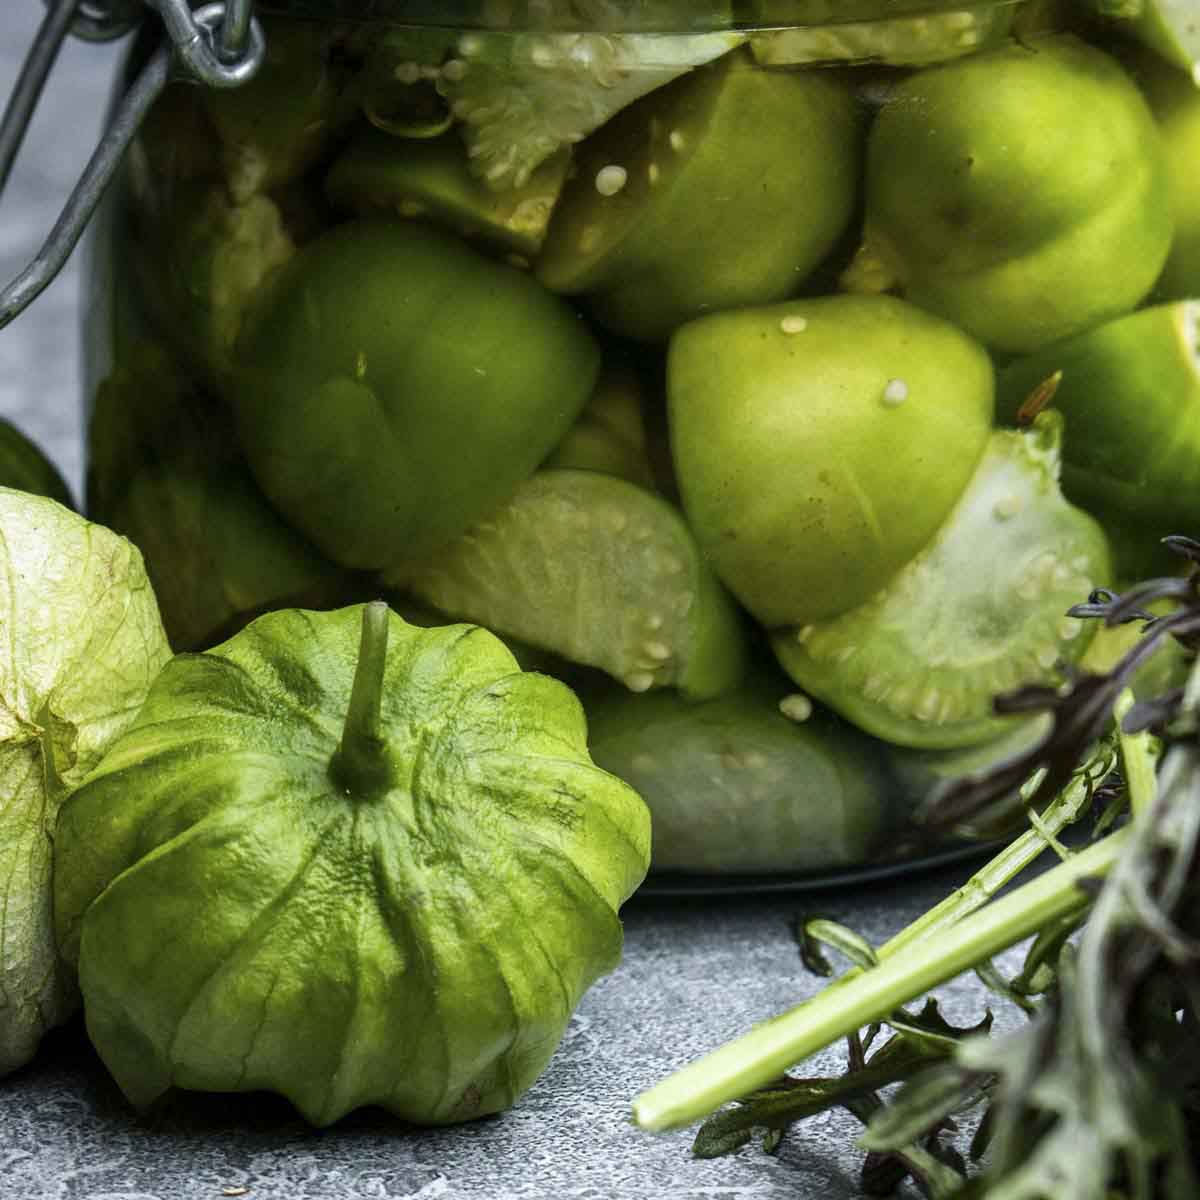 Tomatoes on table in front of bottled tomatillos.